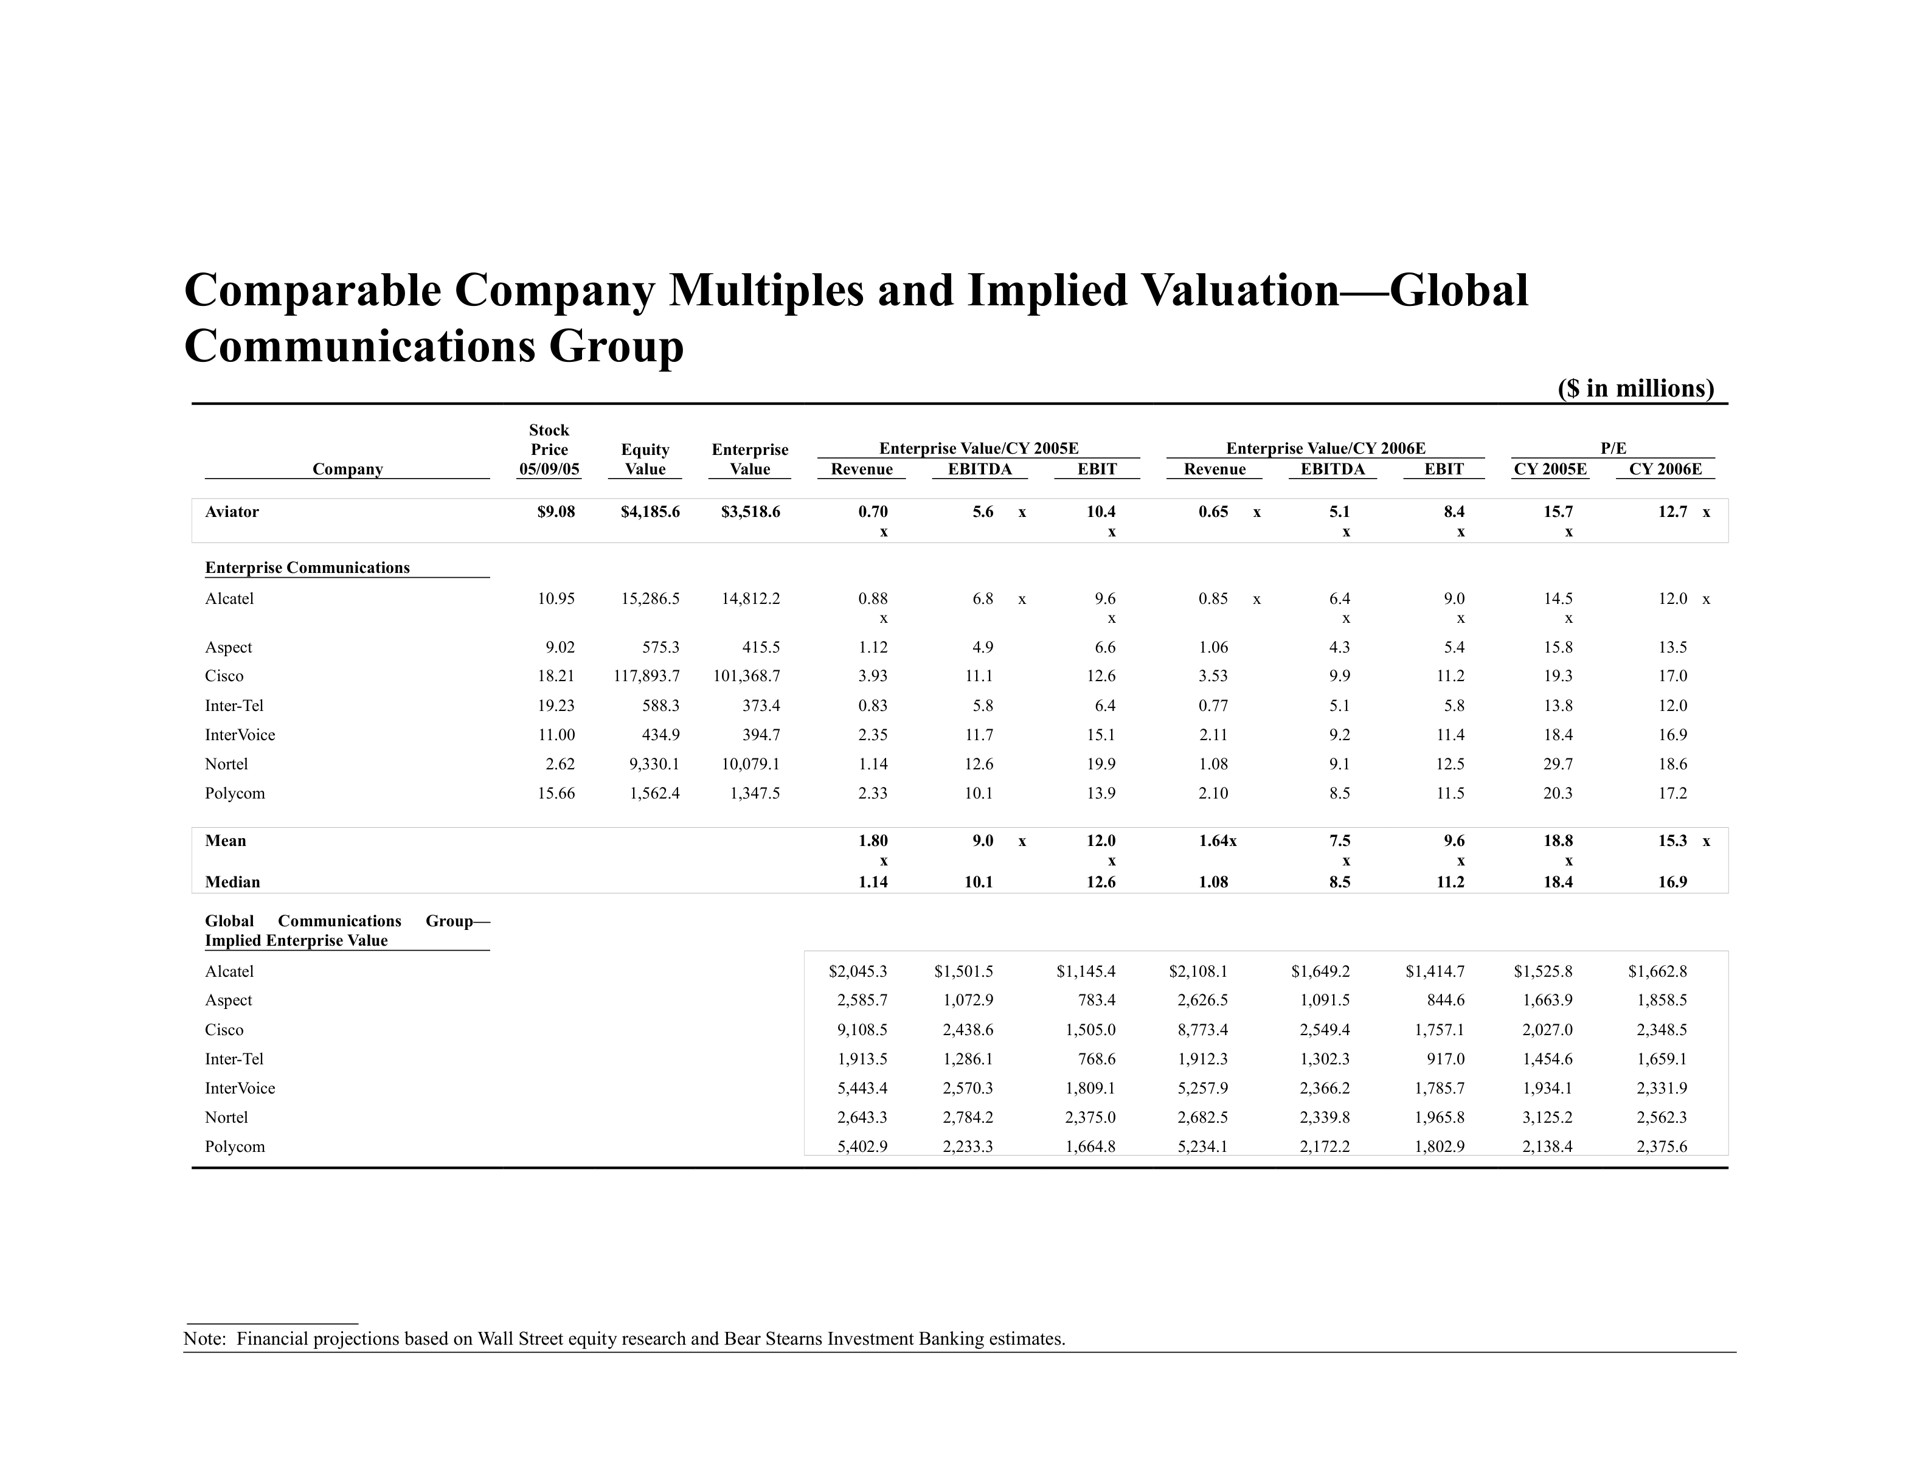 comparable company multiples and implied valuation global communications group | Bear Stearns